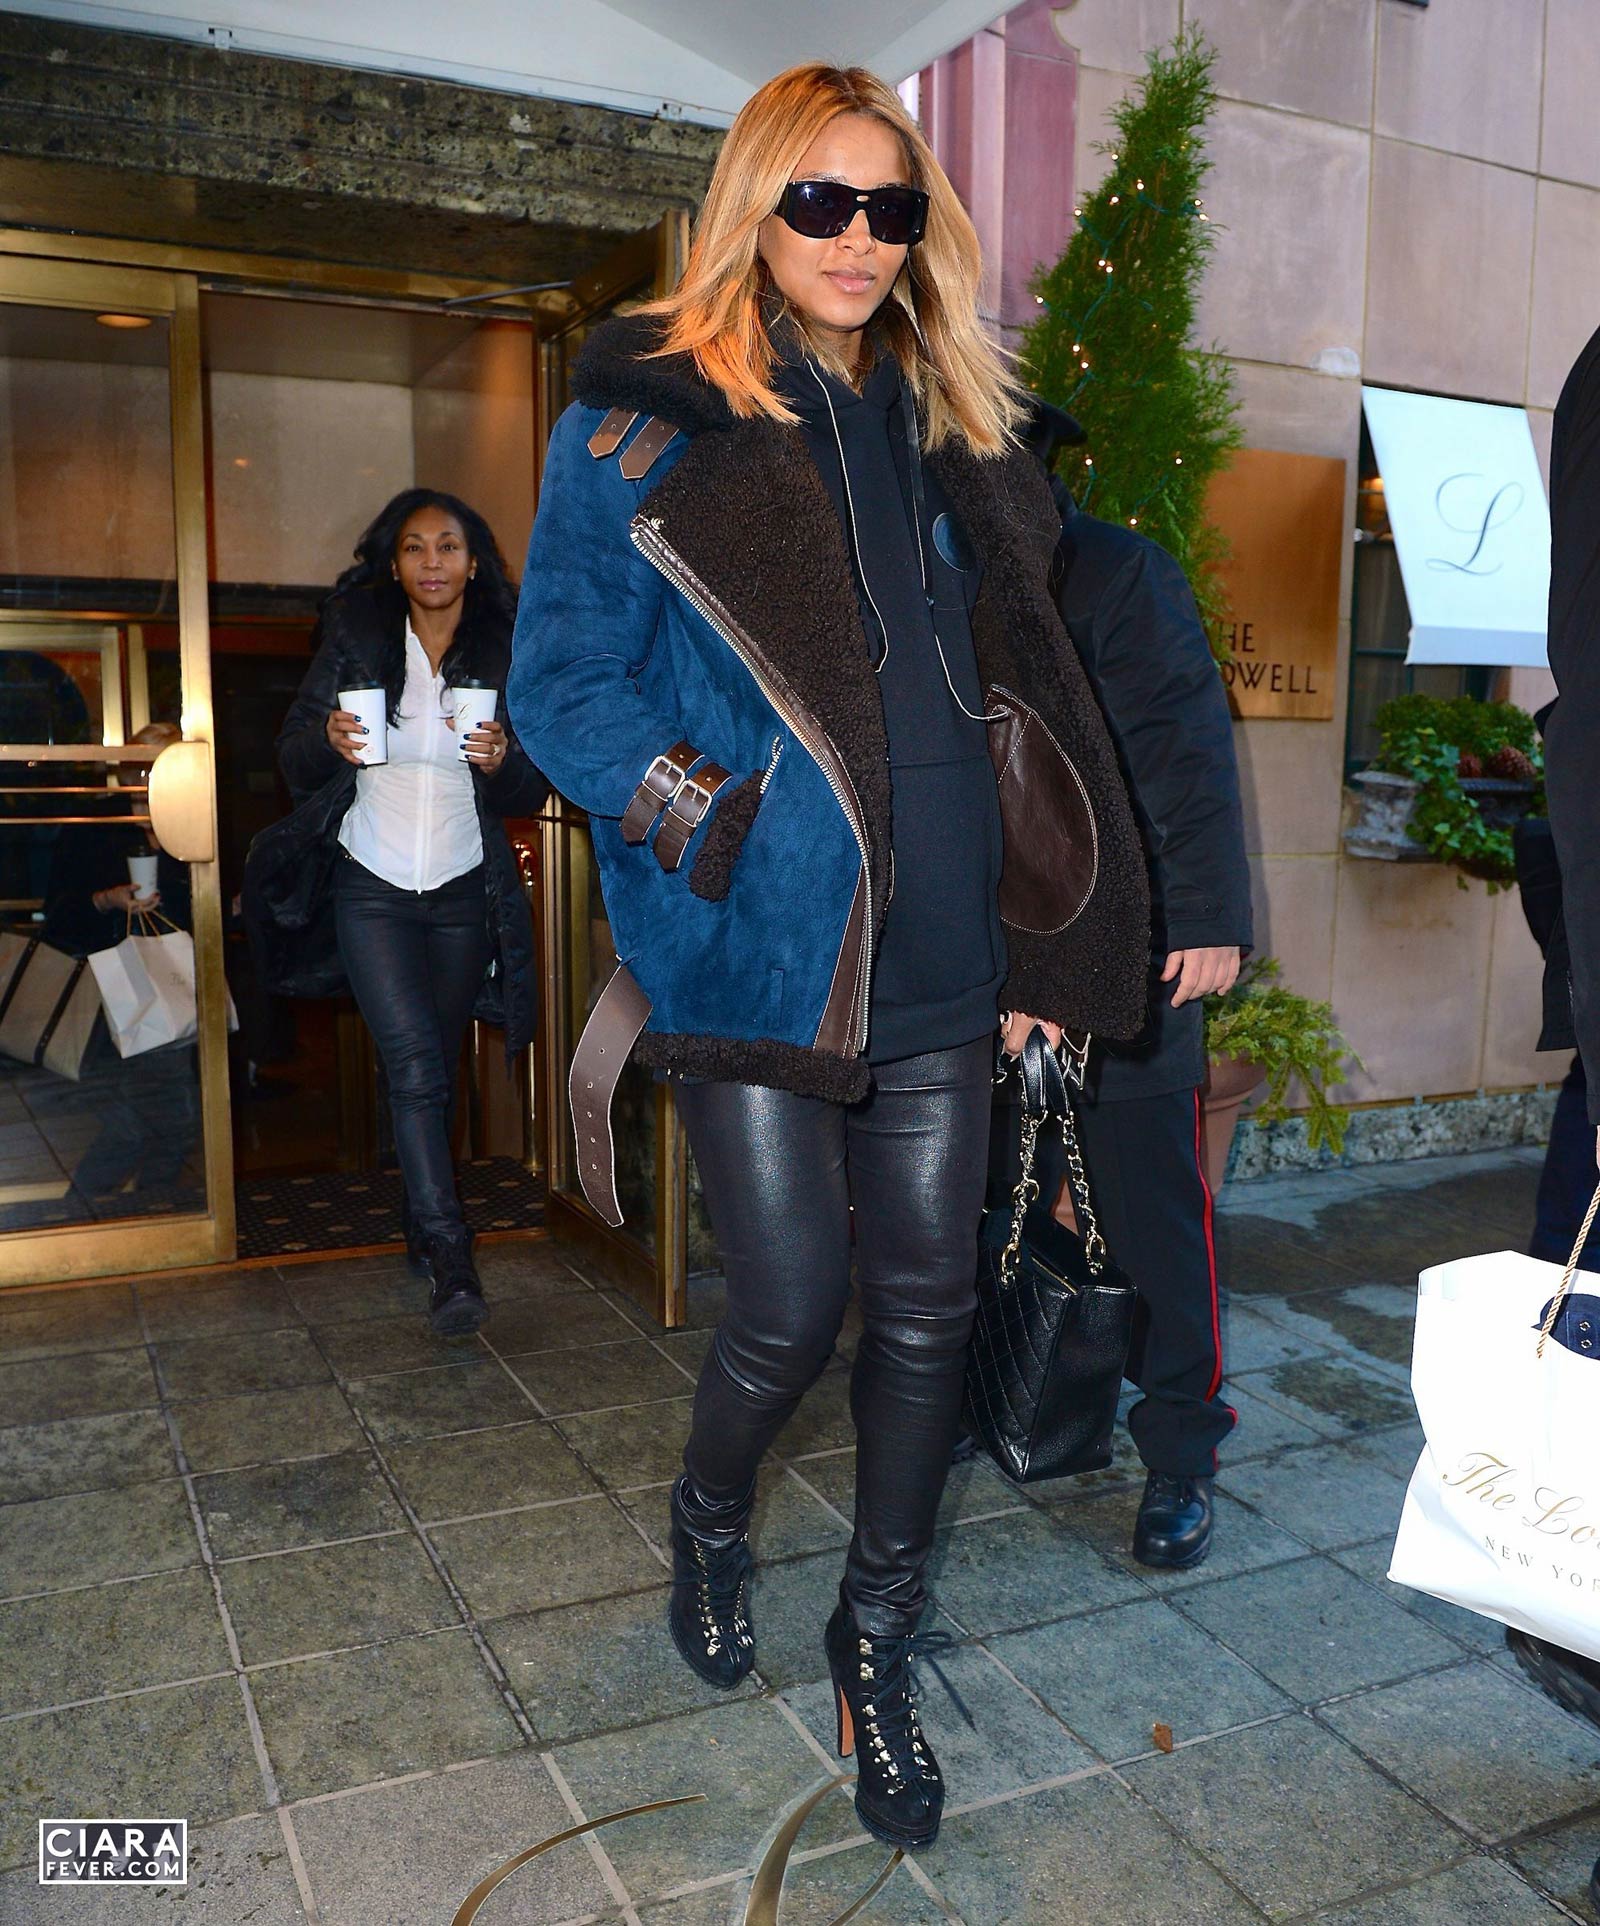 Ciara heads to the airport in New York City